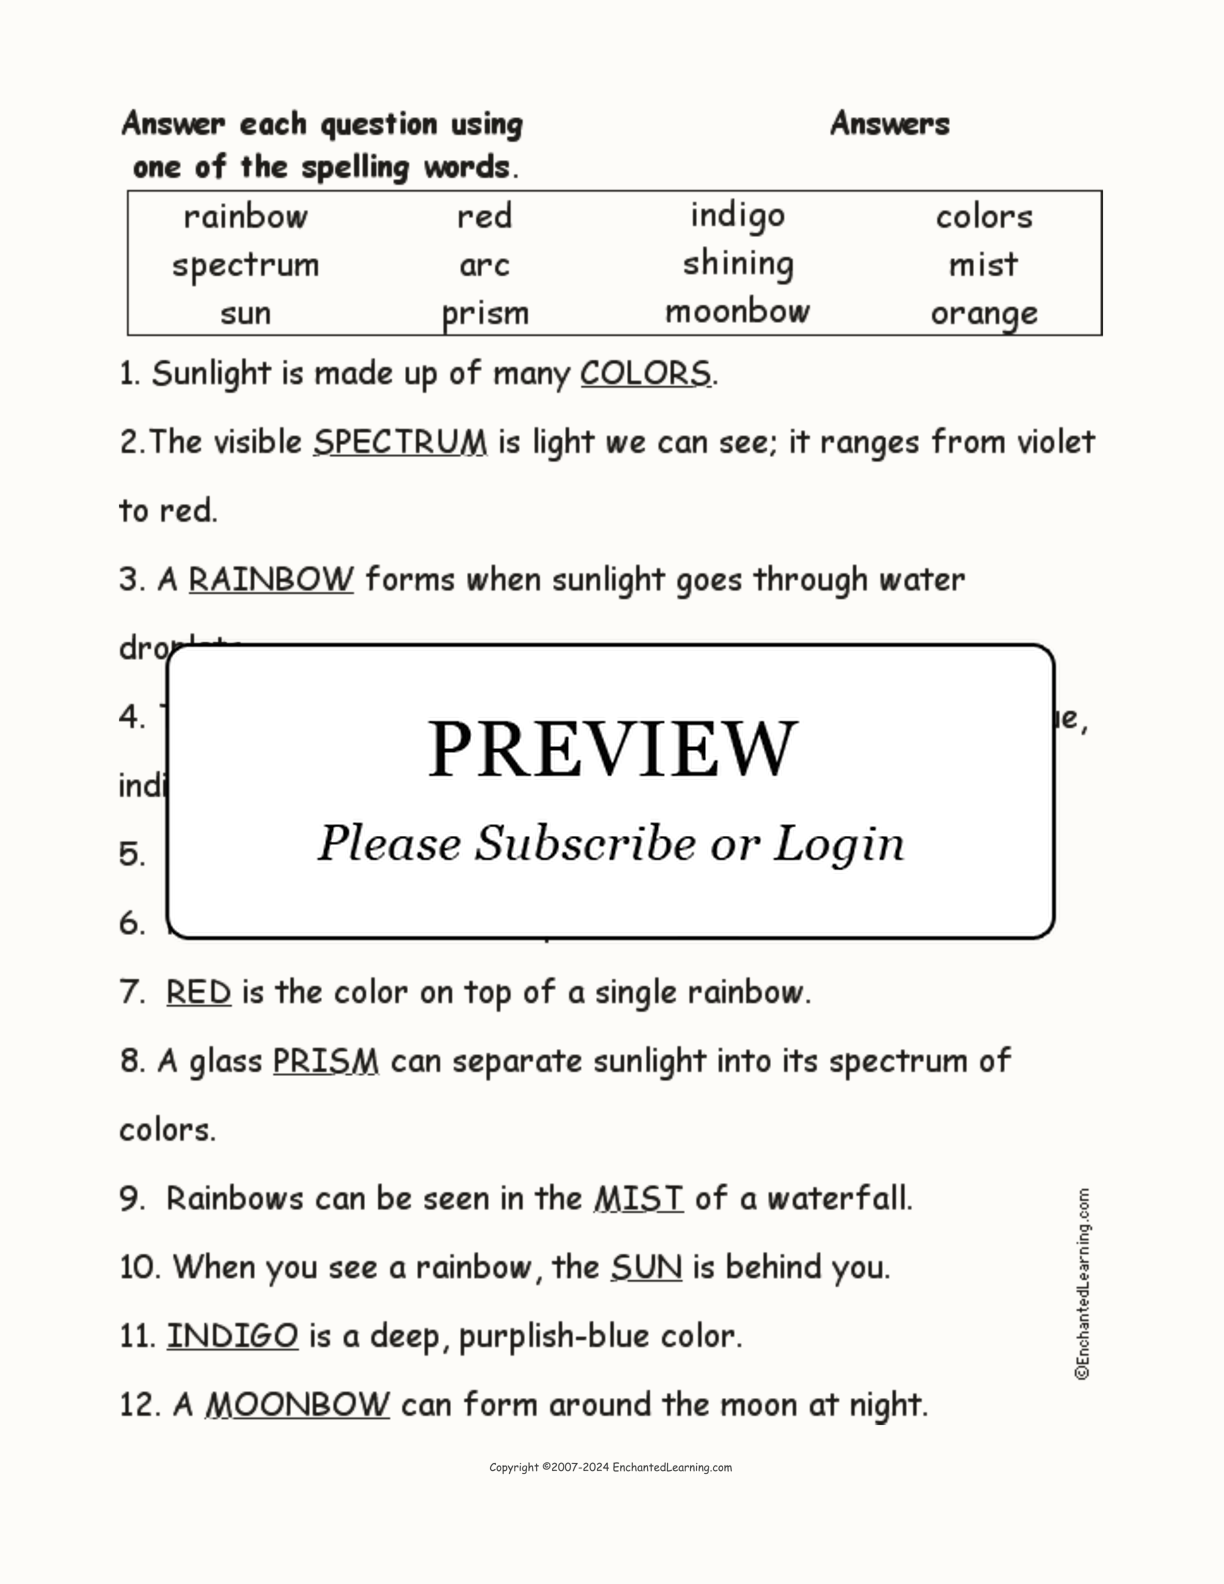 Rainbow Spelling Word Questions interactive worksheet page 2